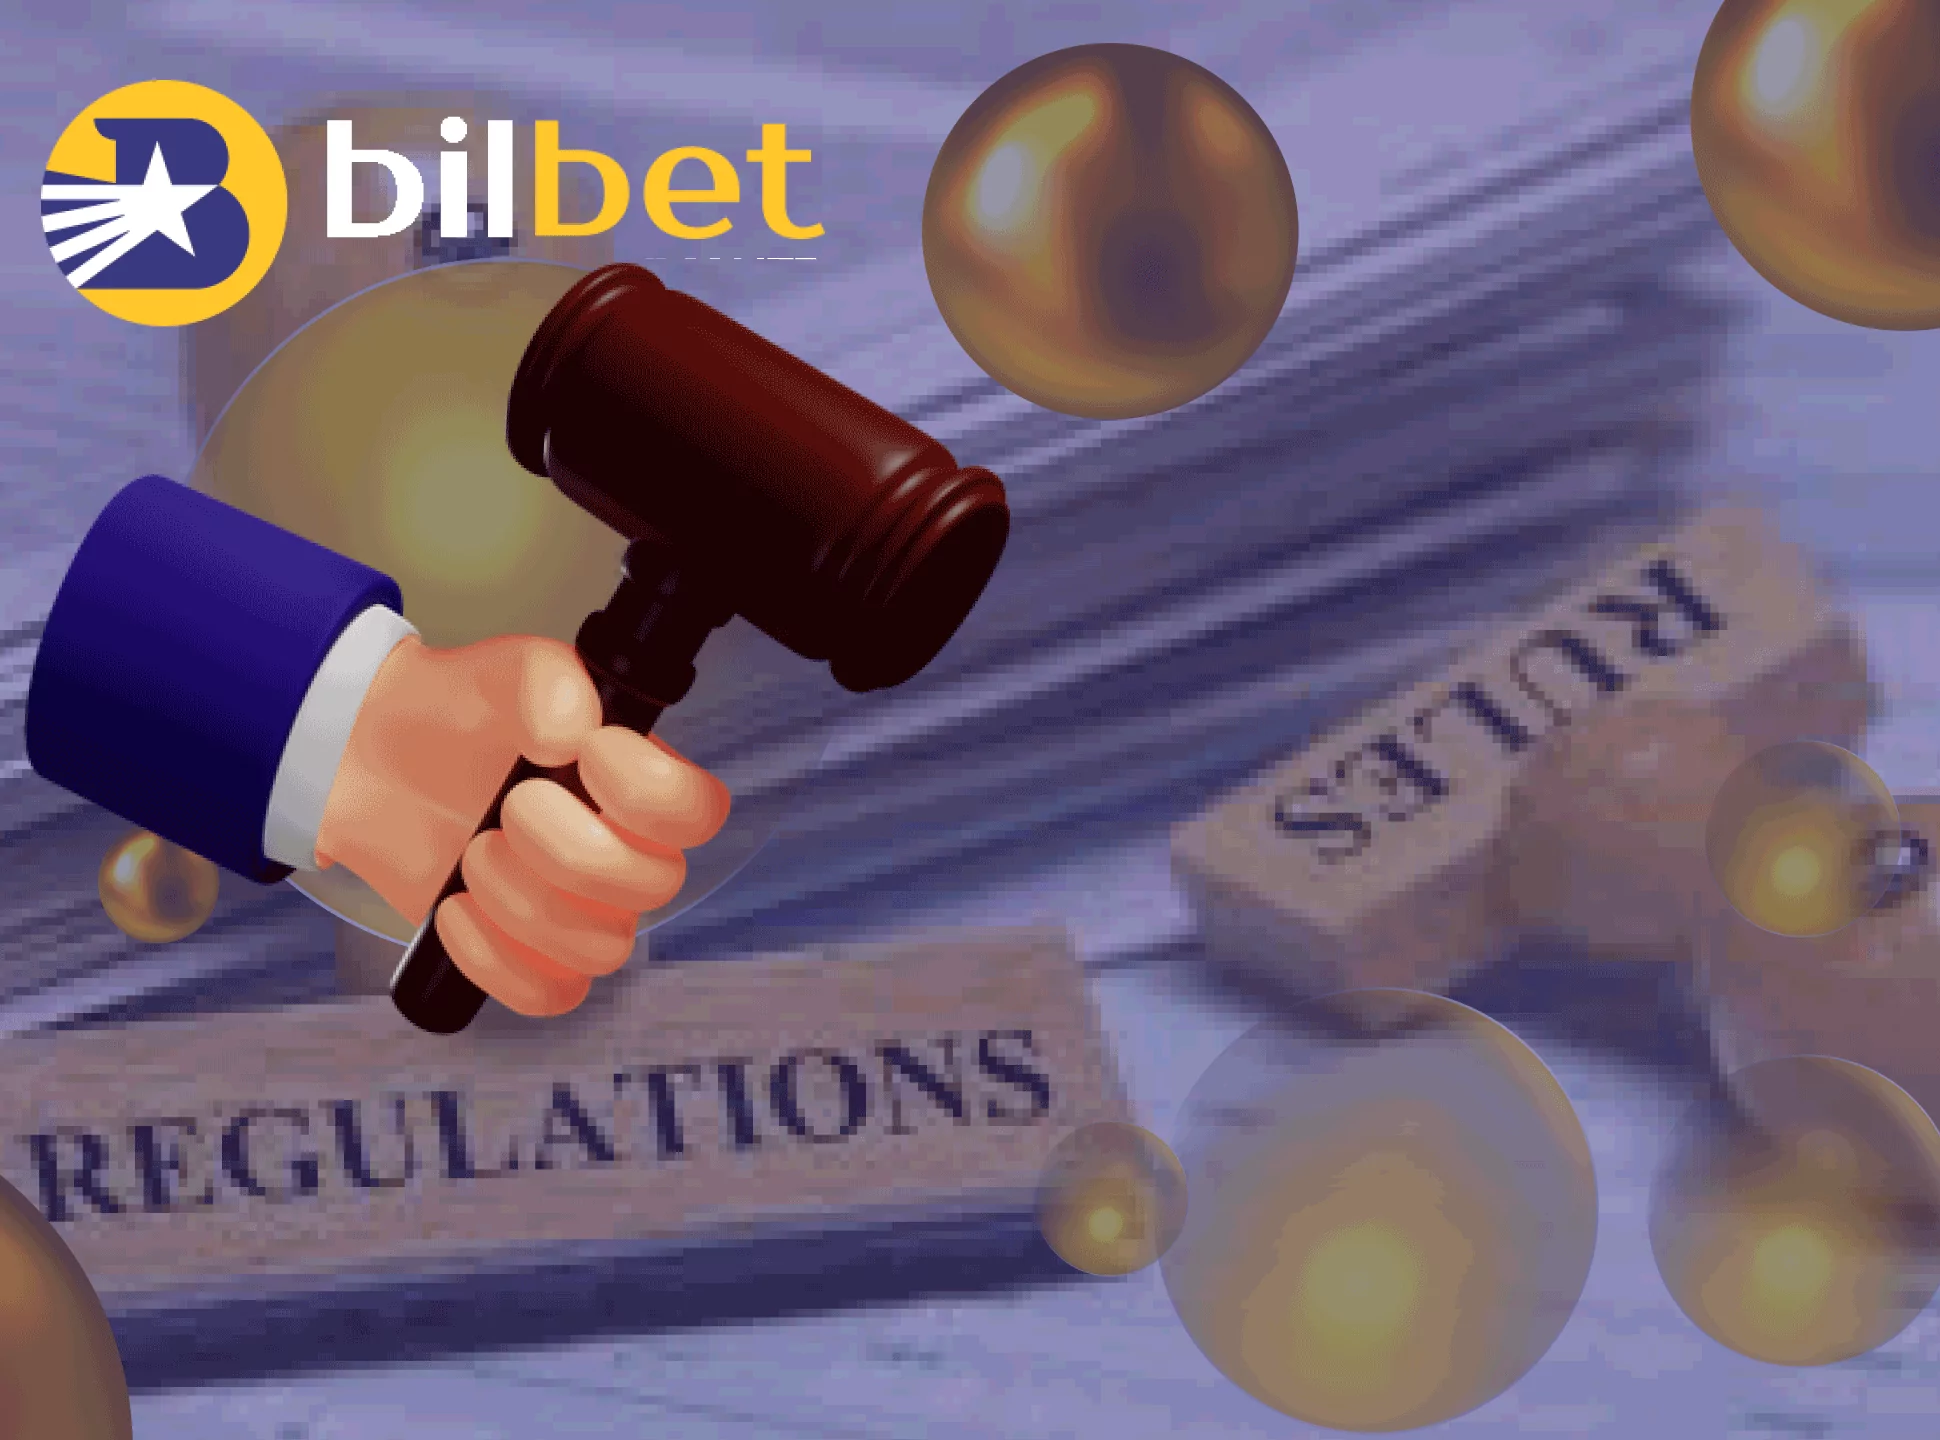 Get acquainted with these rules of betting at Bilbet.